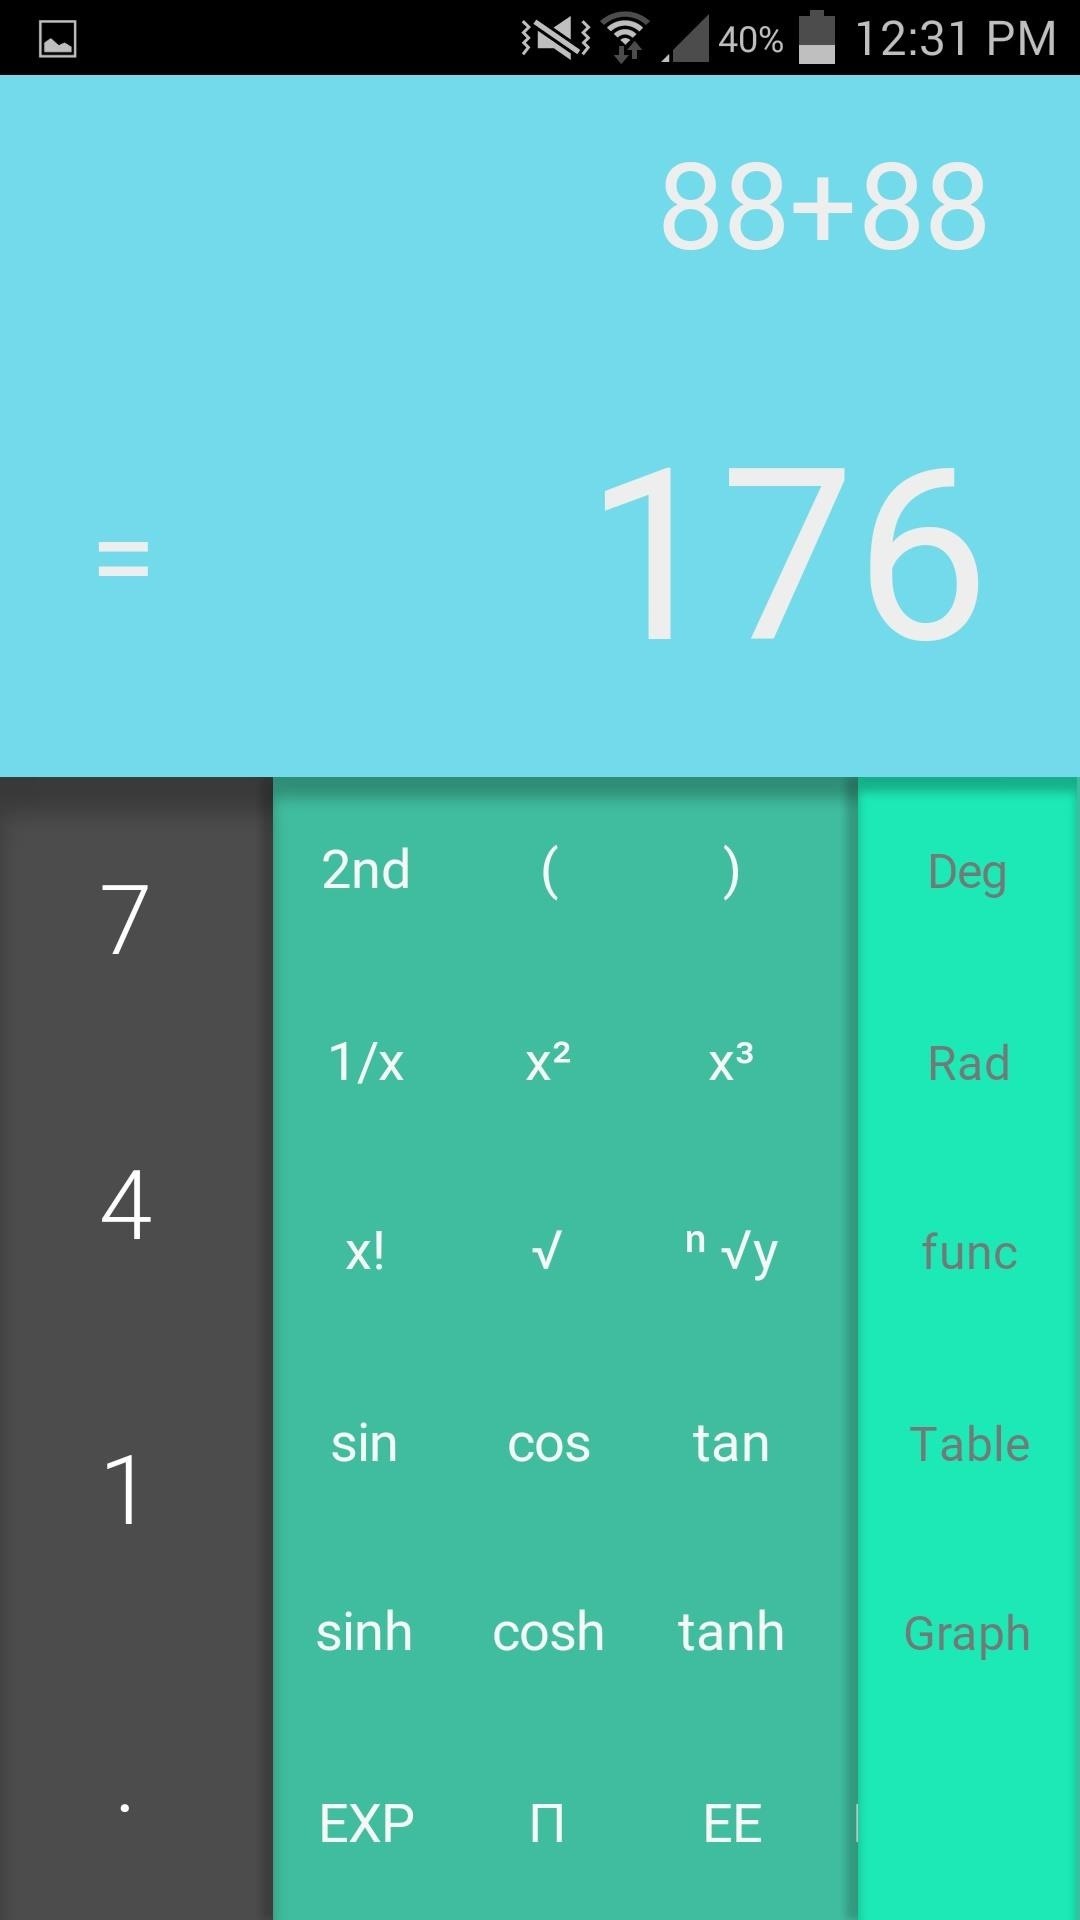 Give Your Android Phone Some “Material Design” with Google's New Calculator App